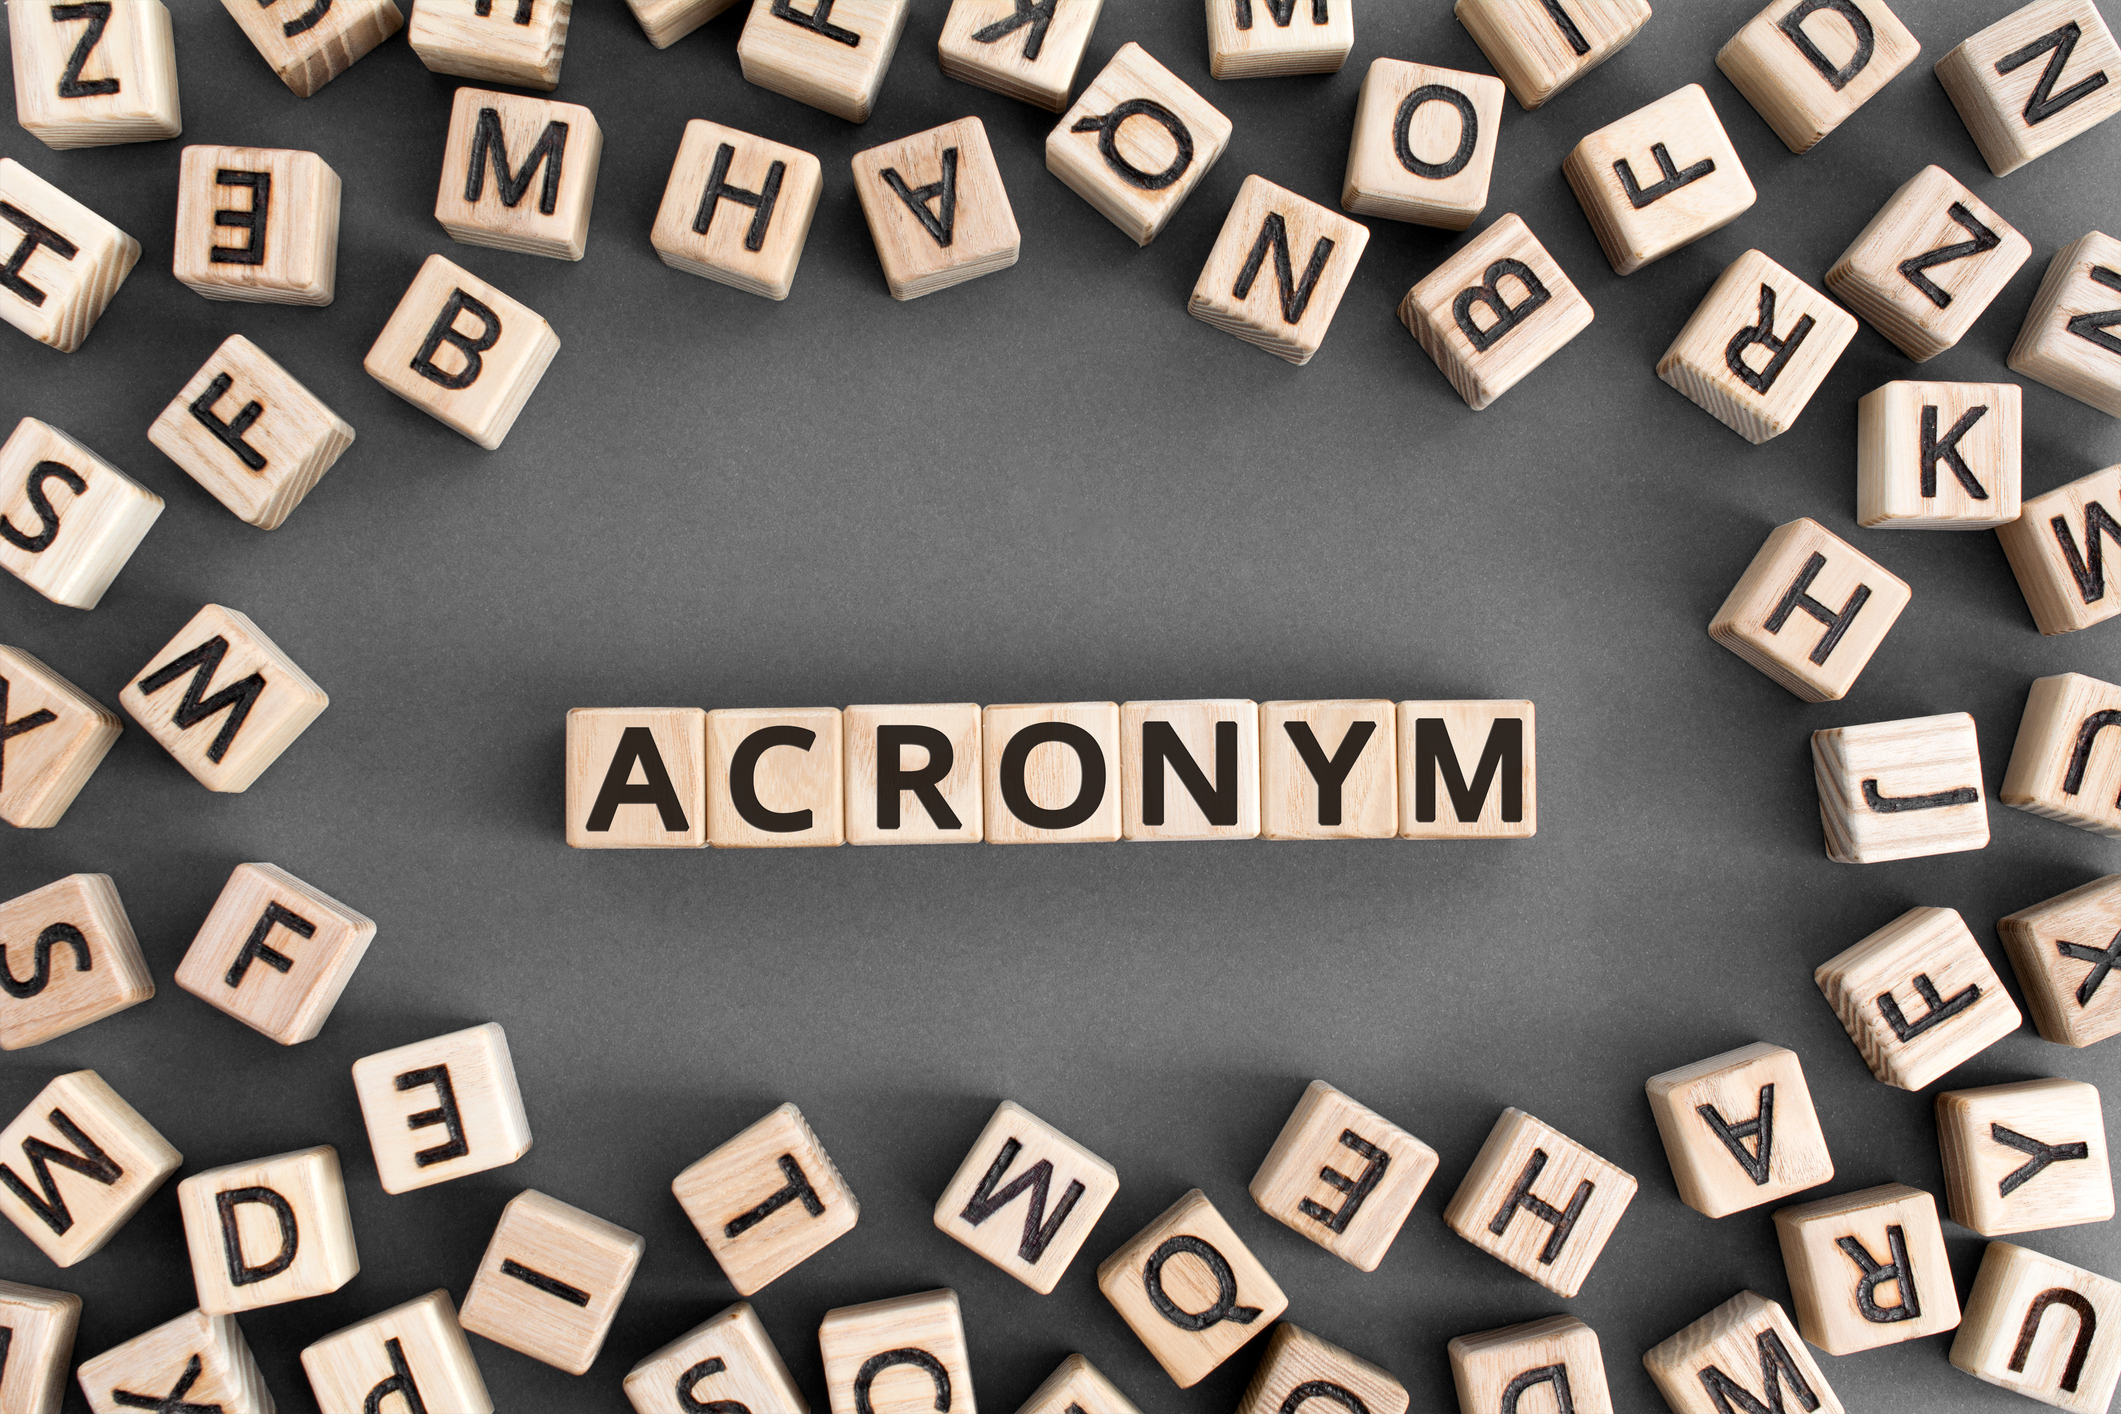 Letter tiles spelling out the word "Acronym"